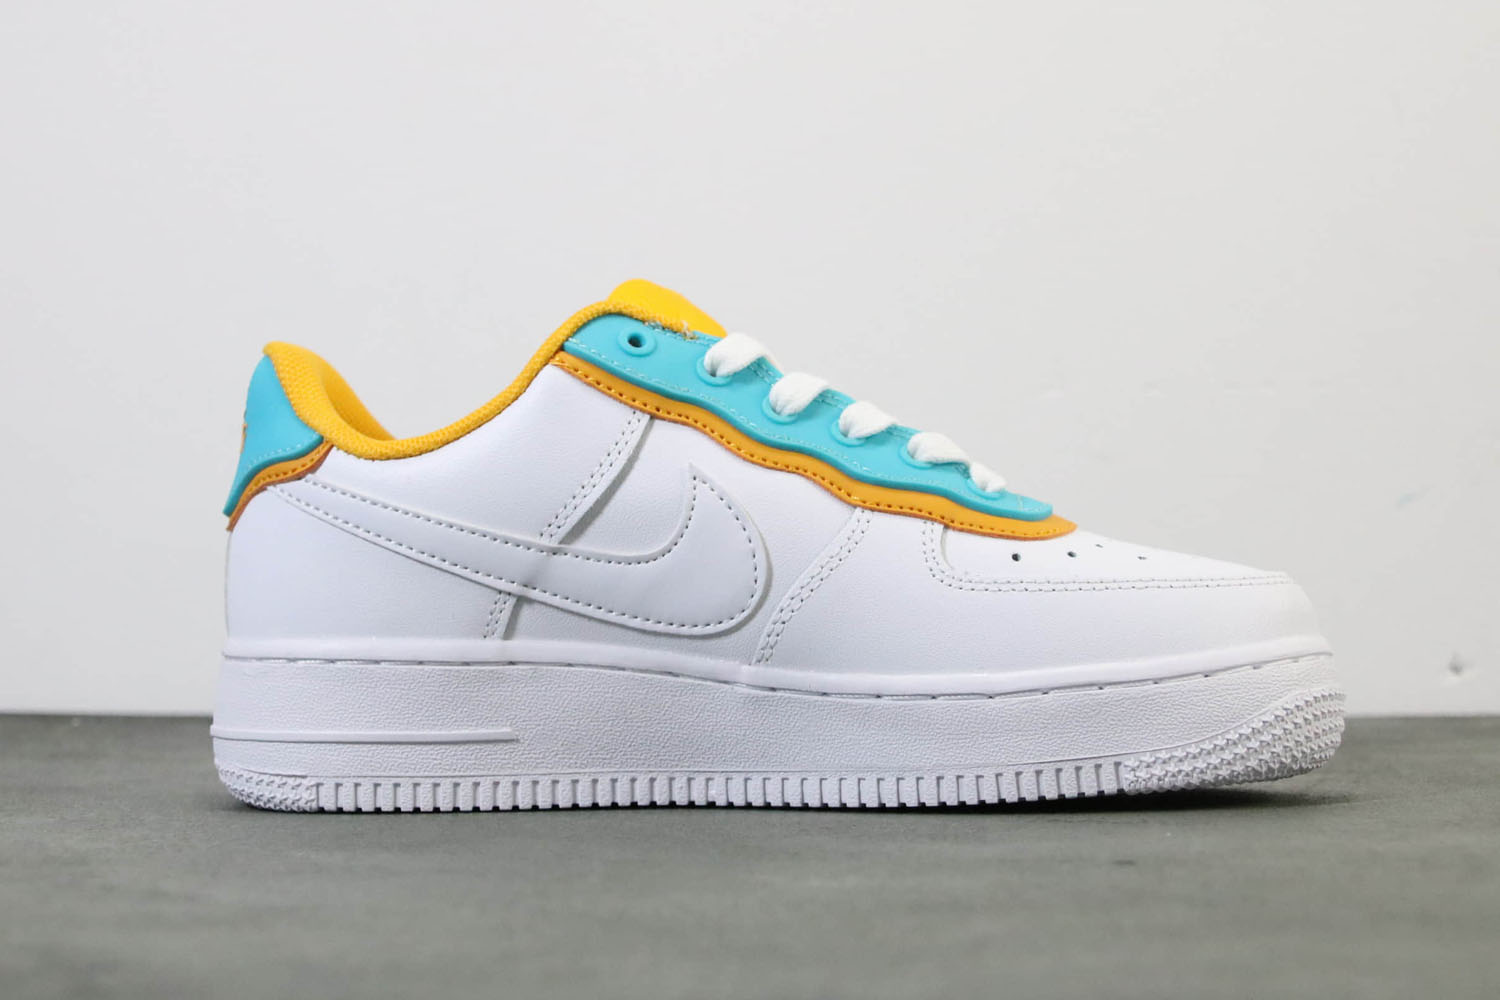 nike air force 1 low blue and yellow